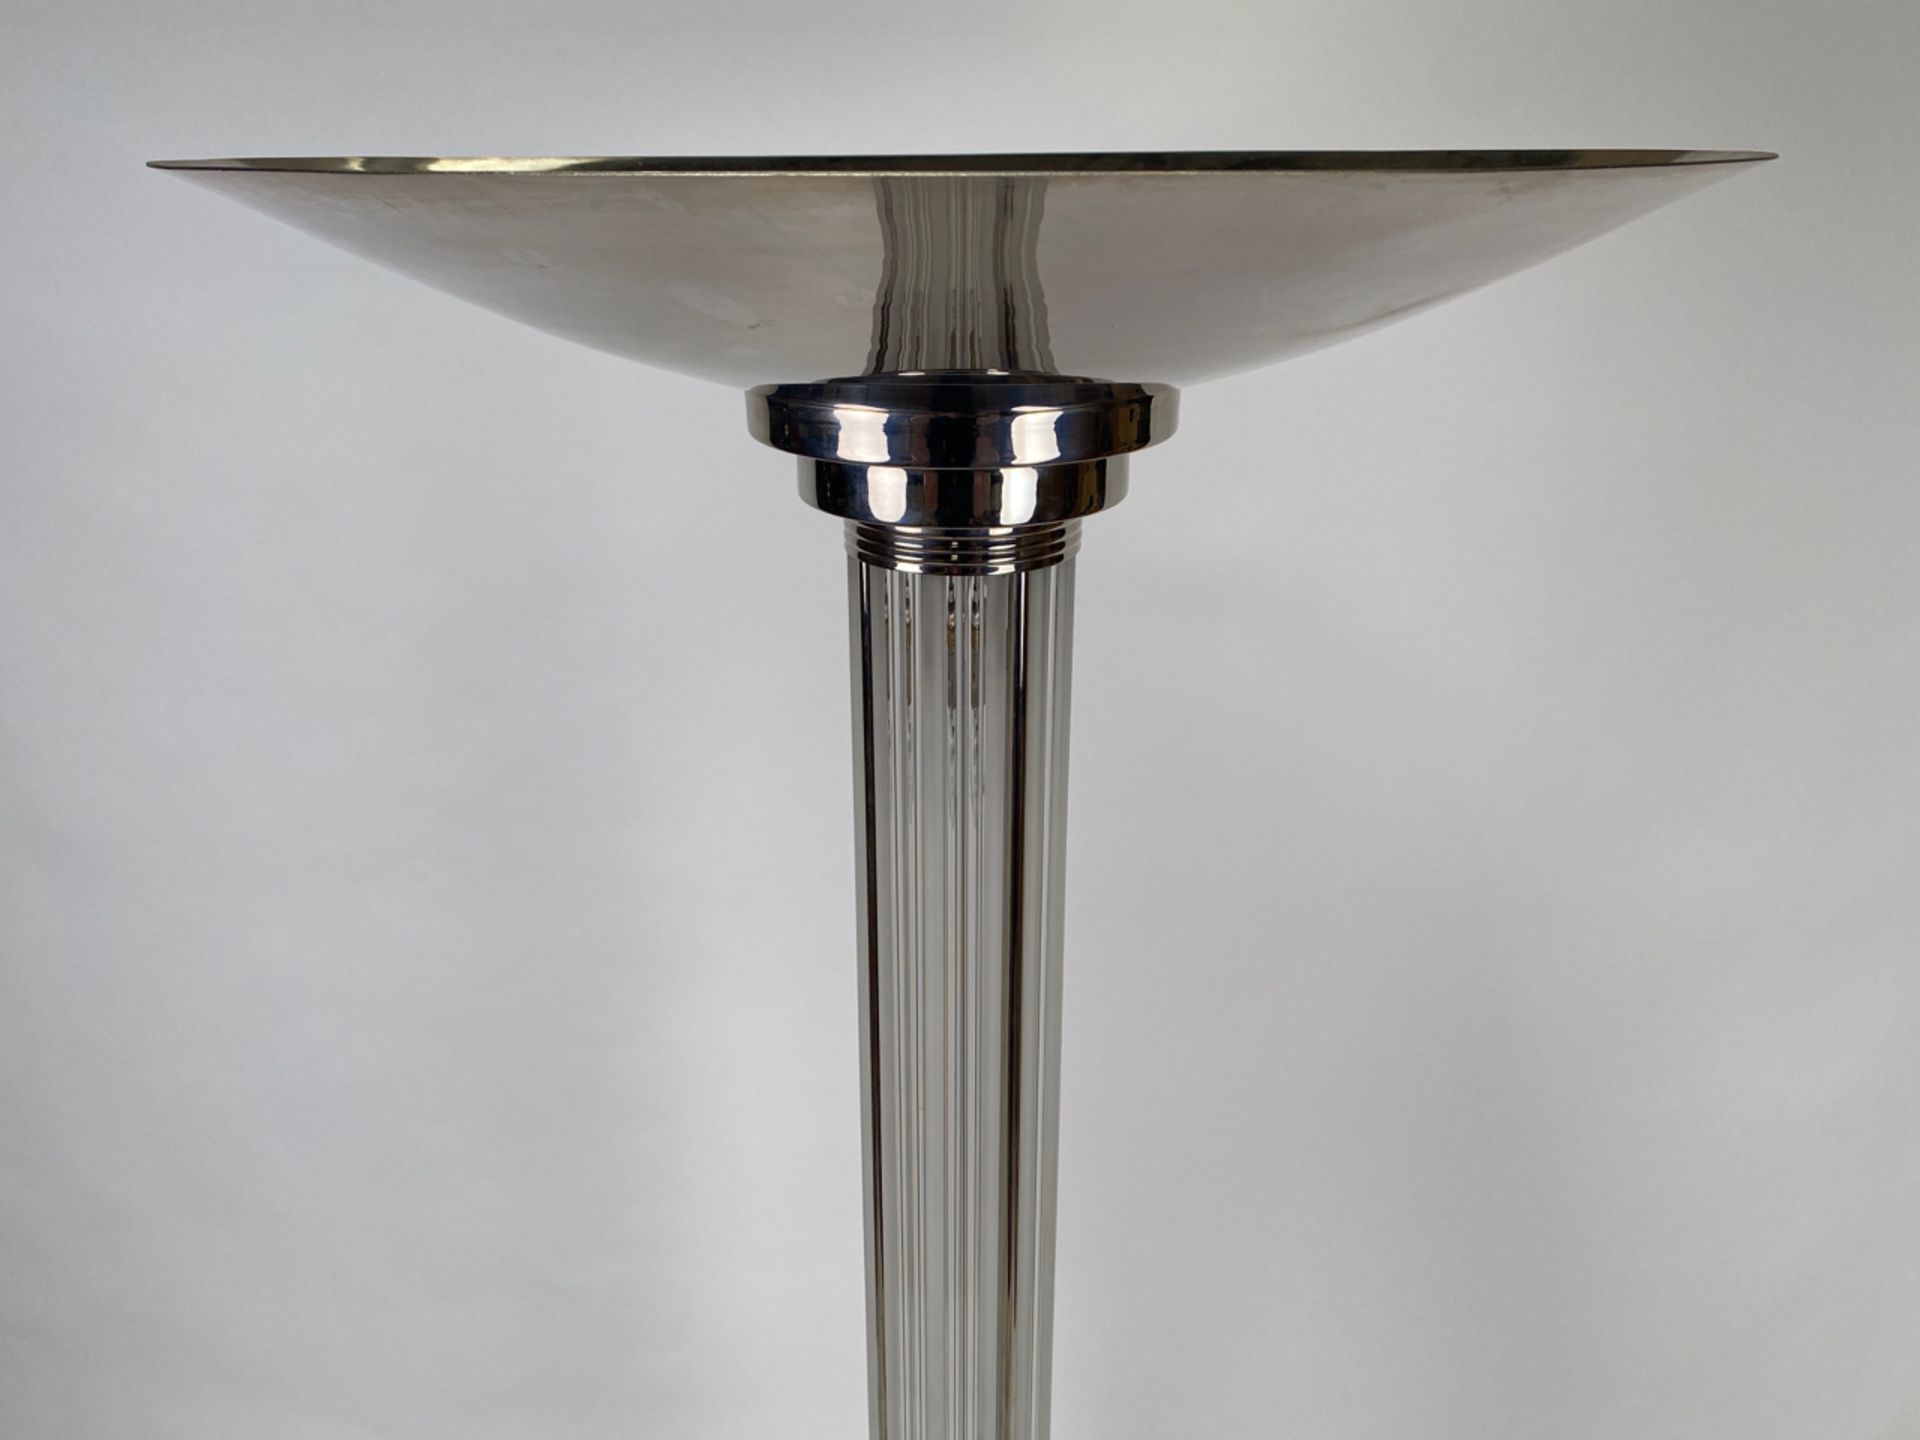 Art Deco Style Model le Mons Glass Rods, Chrome, and Black Lacquer Floor Lamp - Image 7 of 7